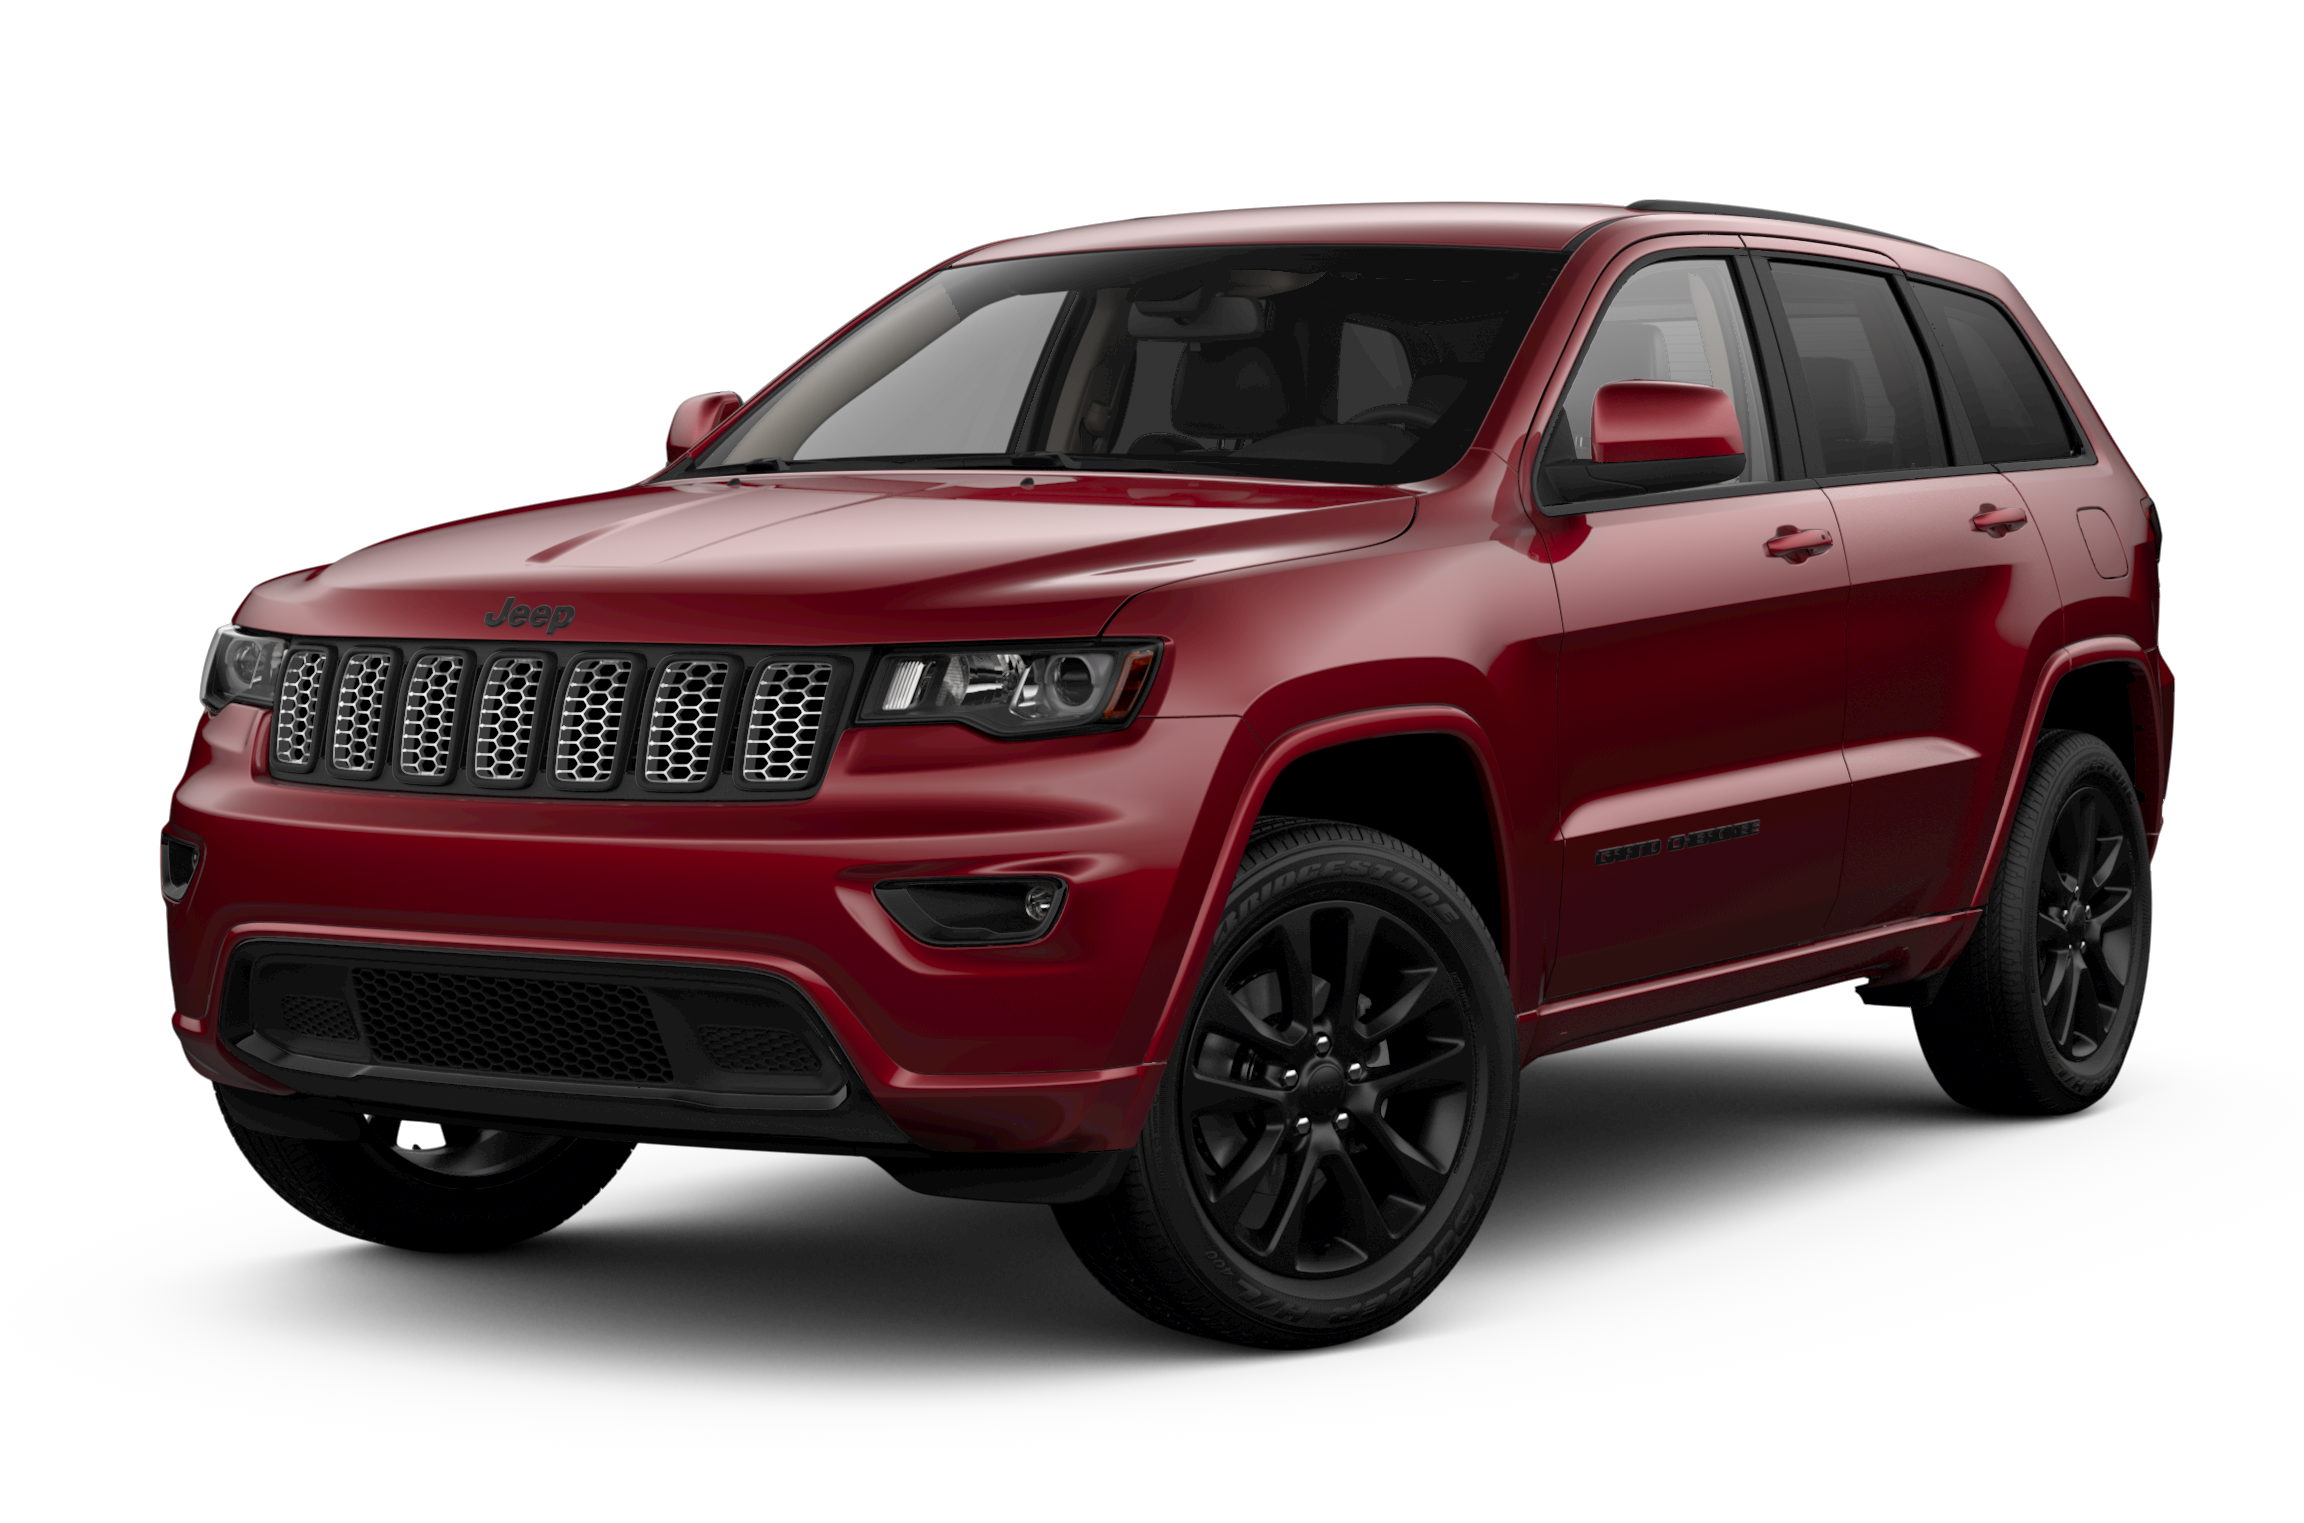 New 2018 Jeep Grand Cherokees for sale at Beaverton's